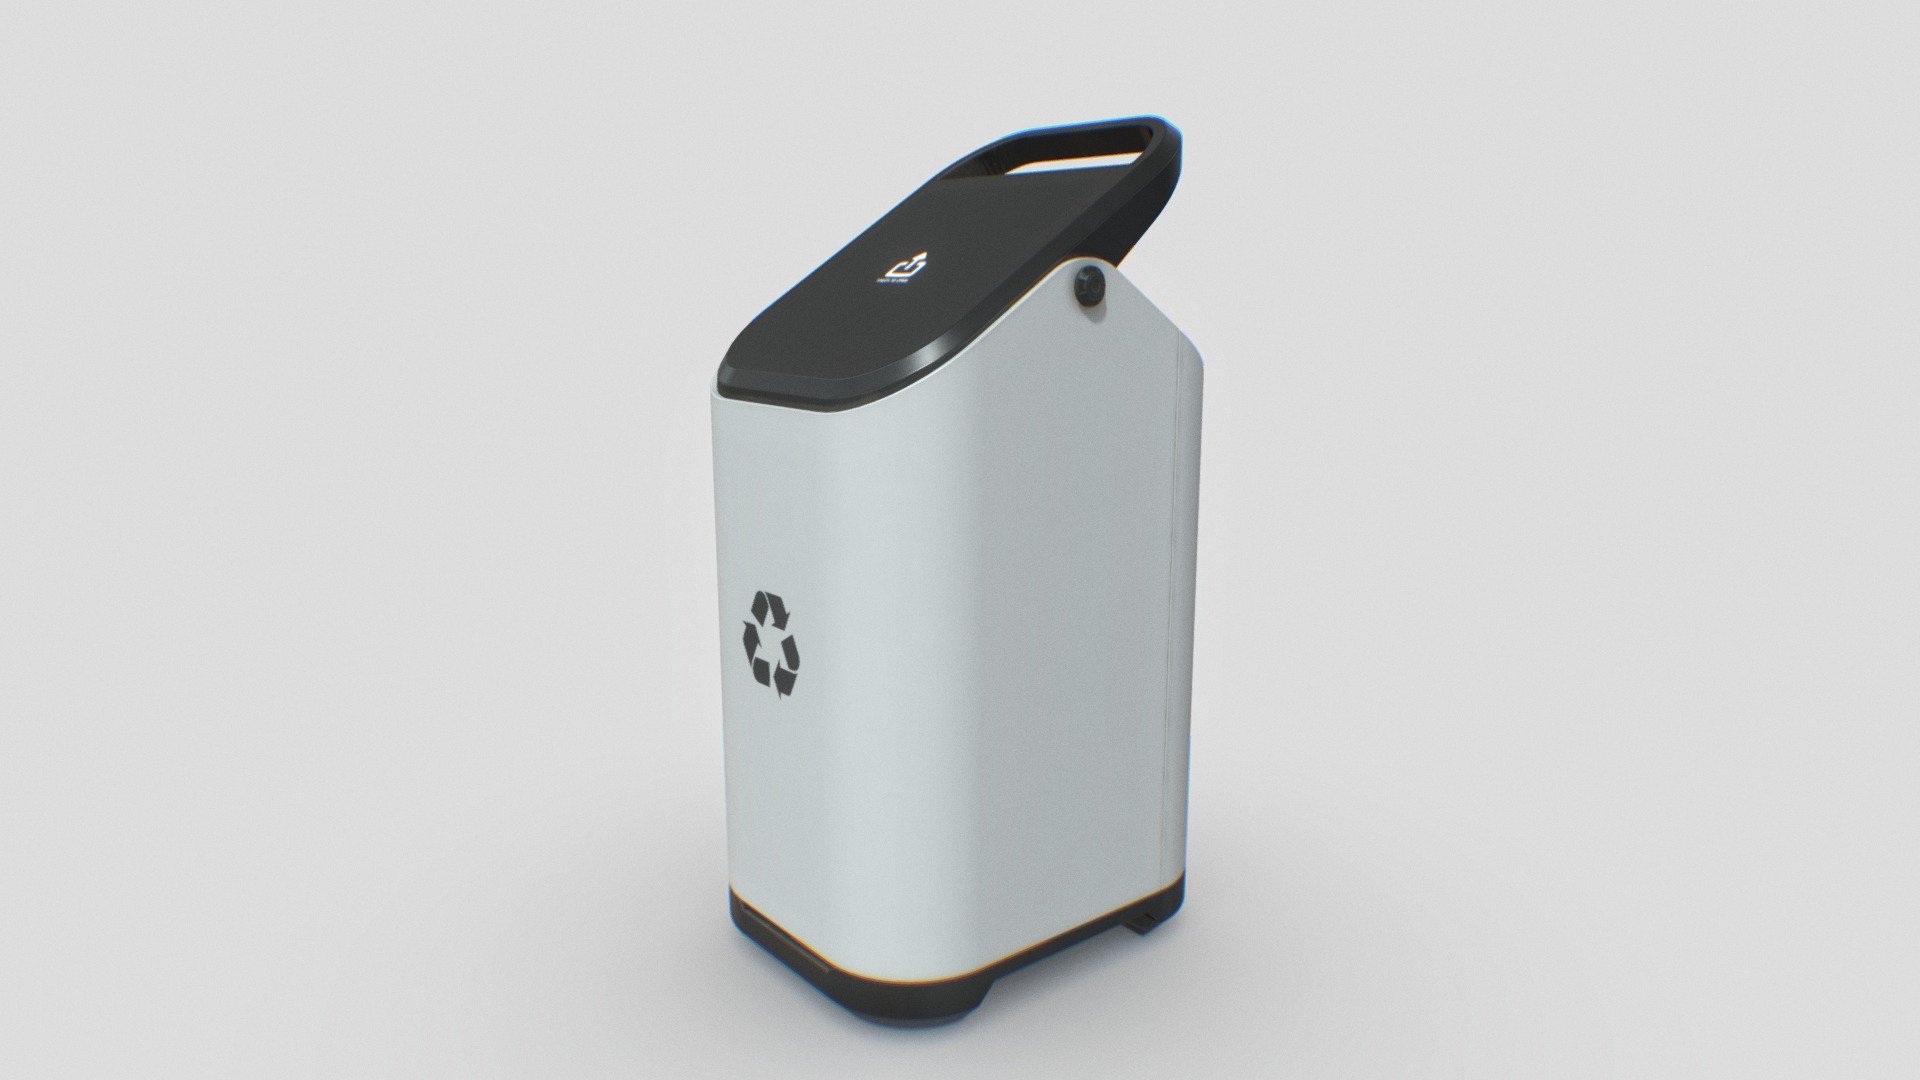 Modern Trash Bin Concept 20x25x47

This model I made it with Blender. I made it with actual size reference.
I include some file format (exported from Blender),texture, some sample render and also I include the lighting setup on the Blender file. 
Hopefully you enjoy it. 
Or, you can edit my model with your preferense easily.

Please like and share if you enjoy it 3d model